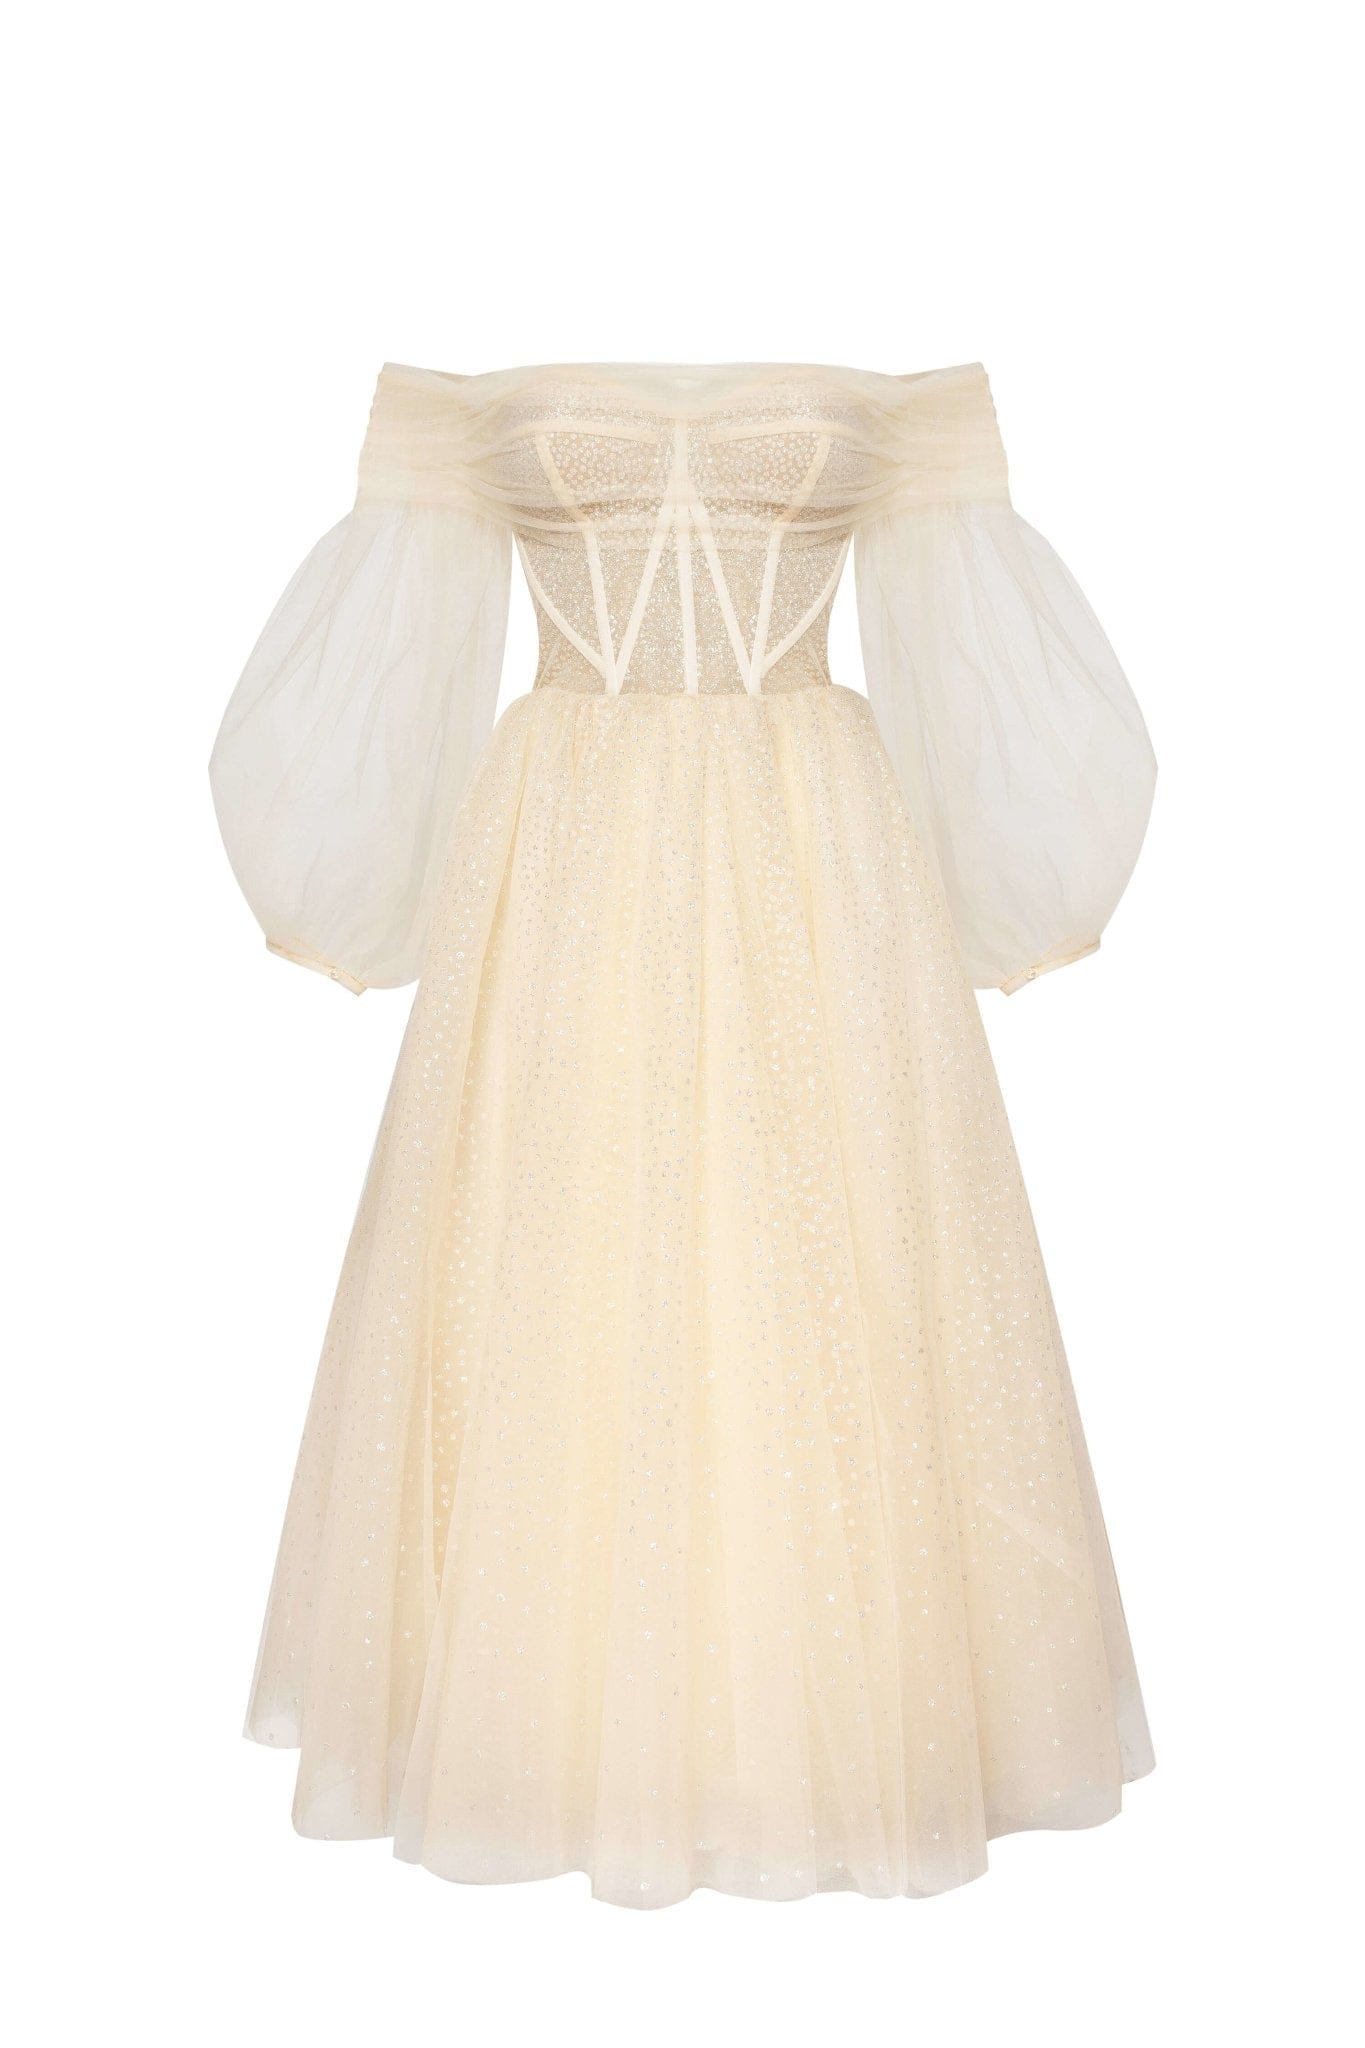 Tulle ➤ Milla Dresses - USA, Worldwide delivery